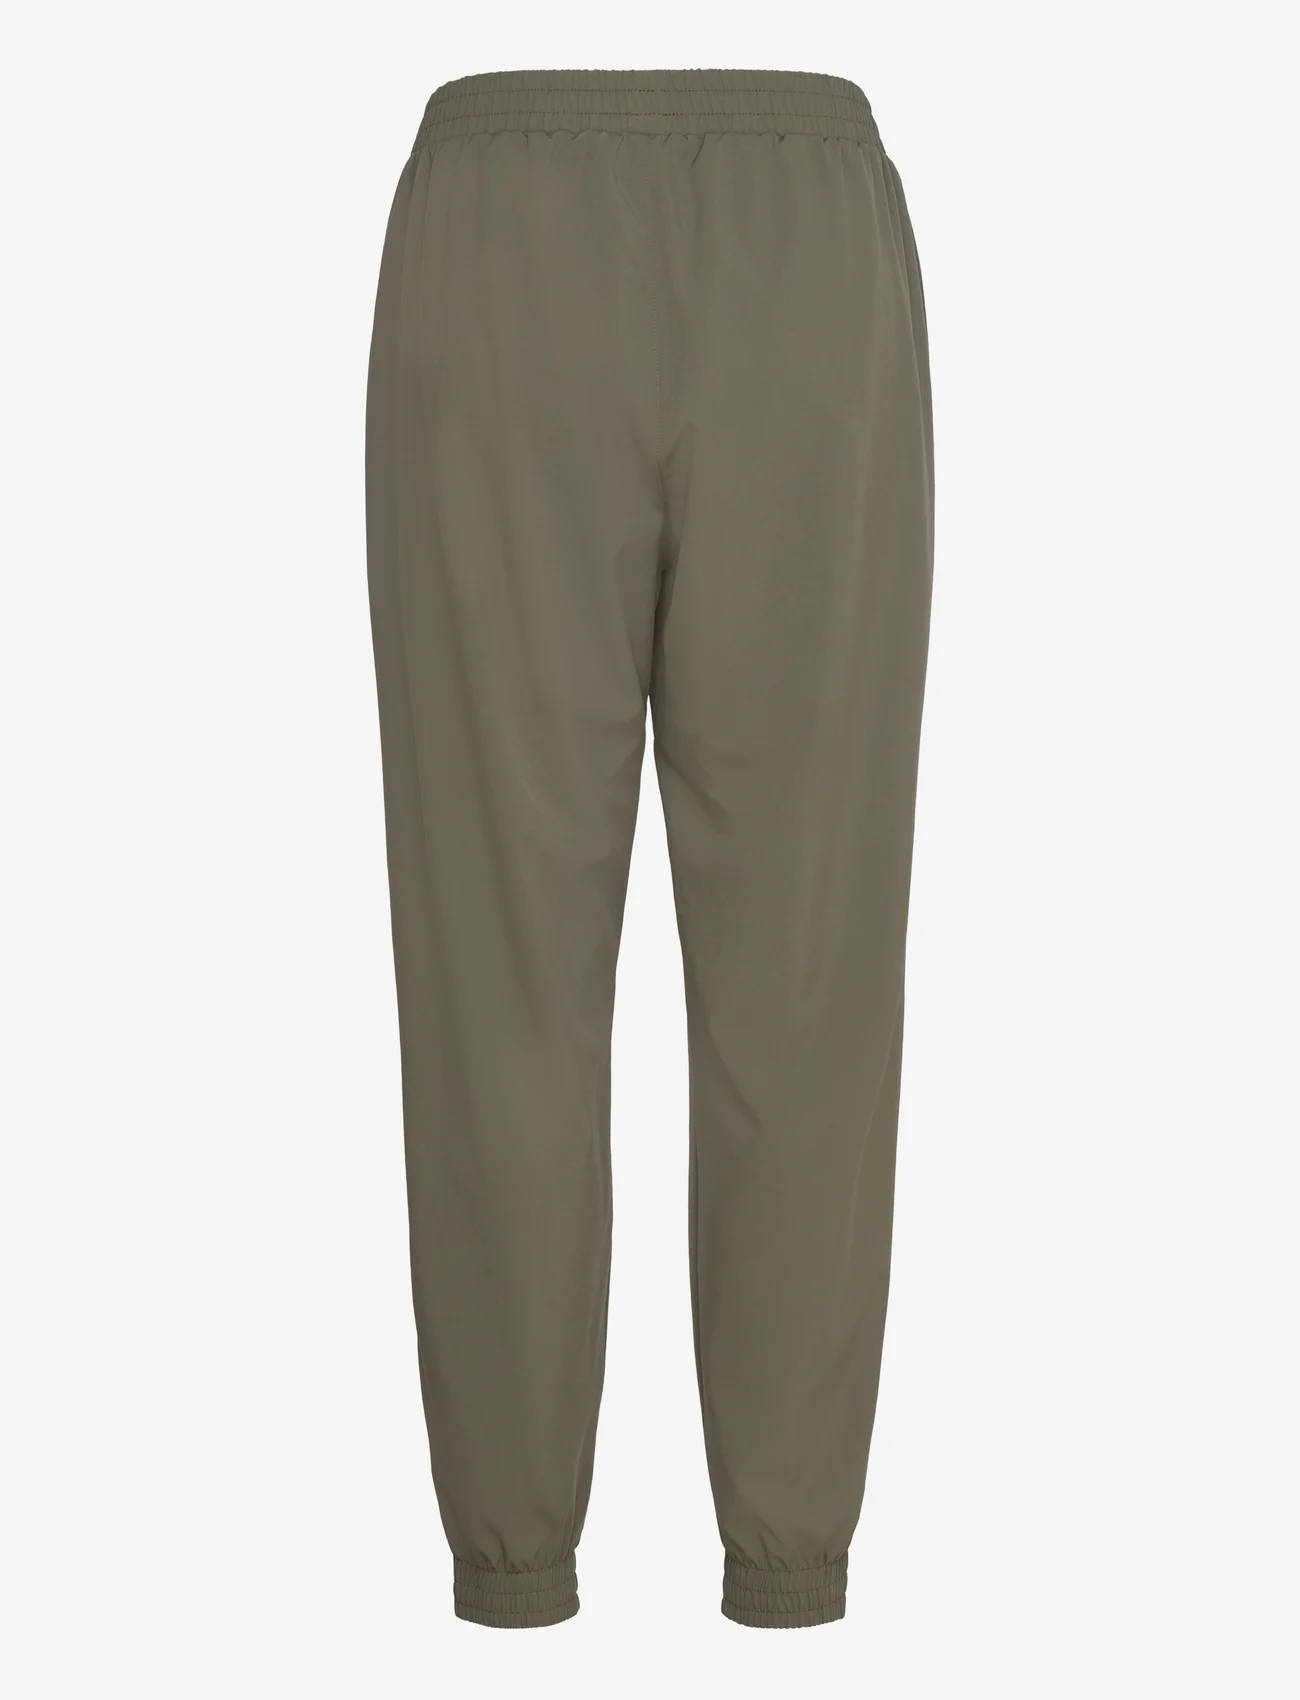 Björn Borg - ACE WOVEN TRACK PANTS - olive night - 1